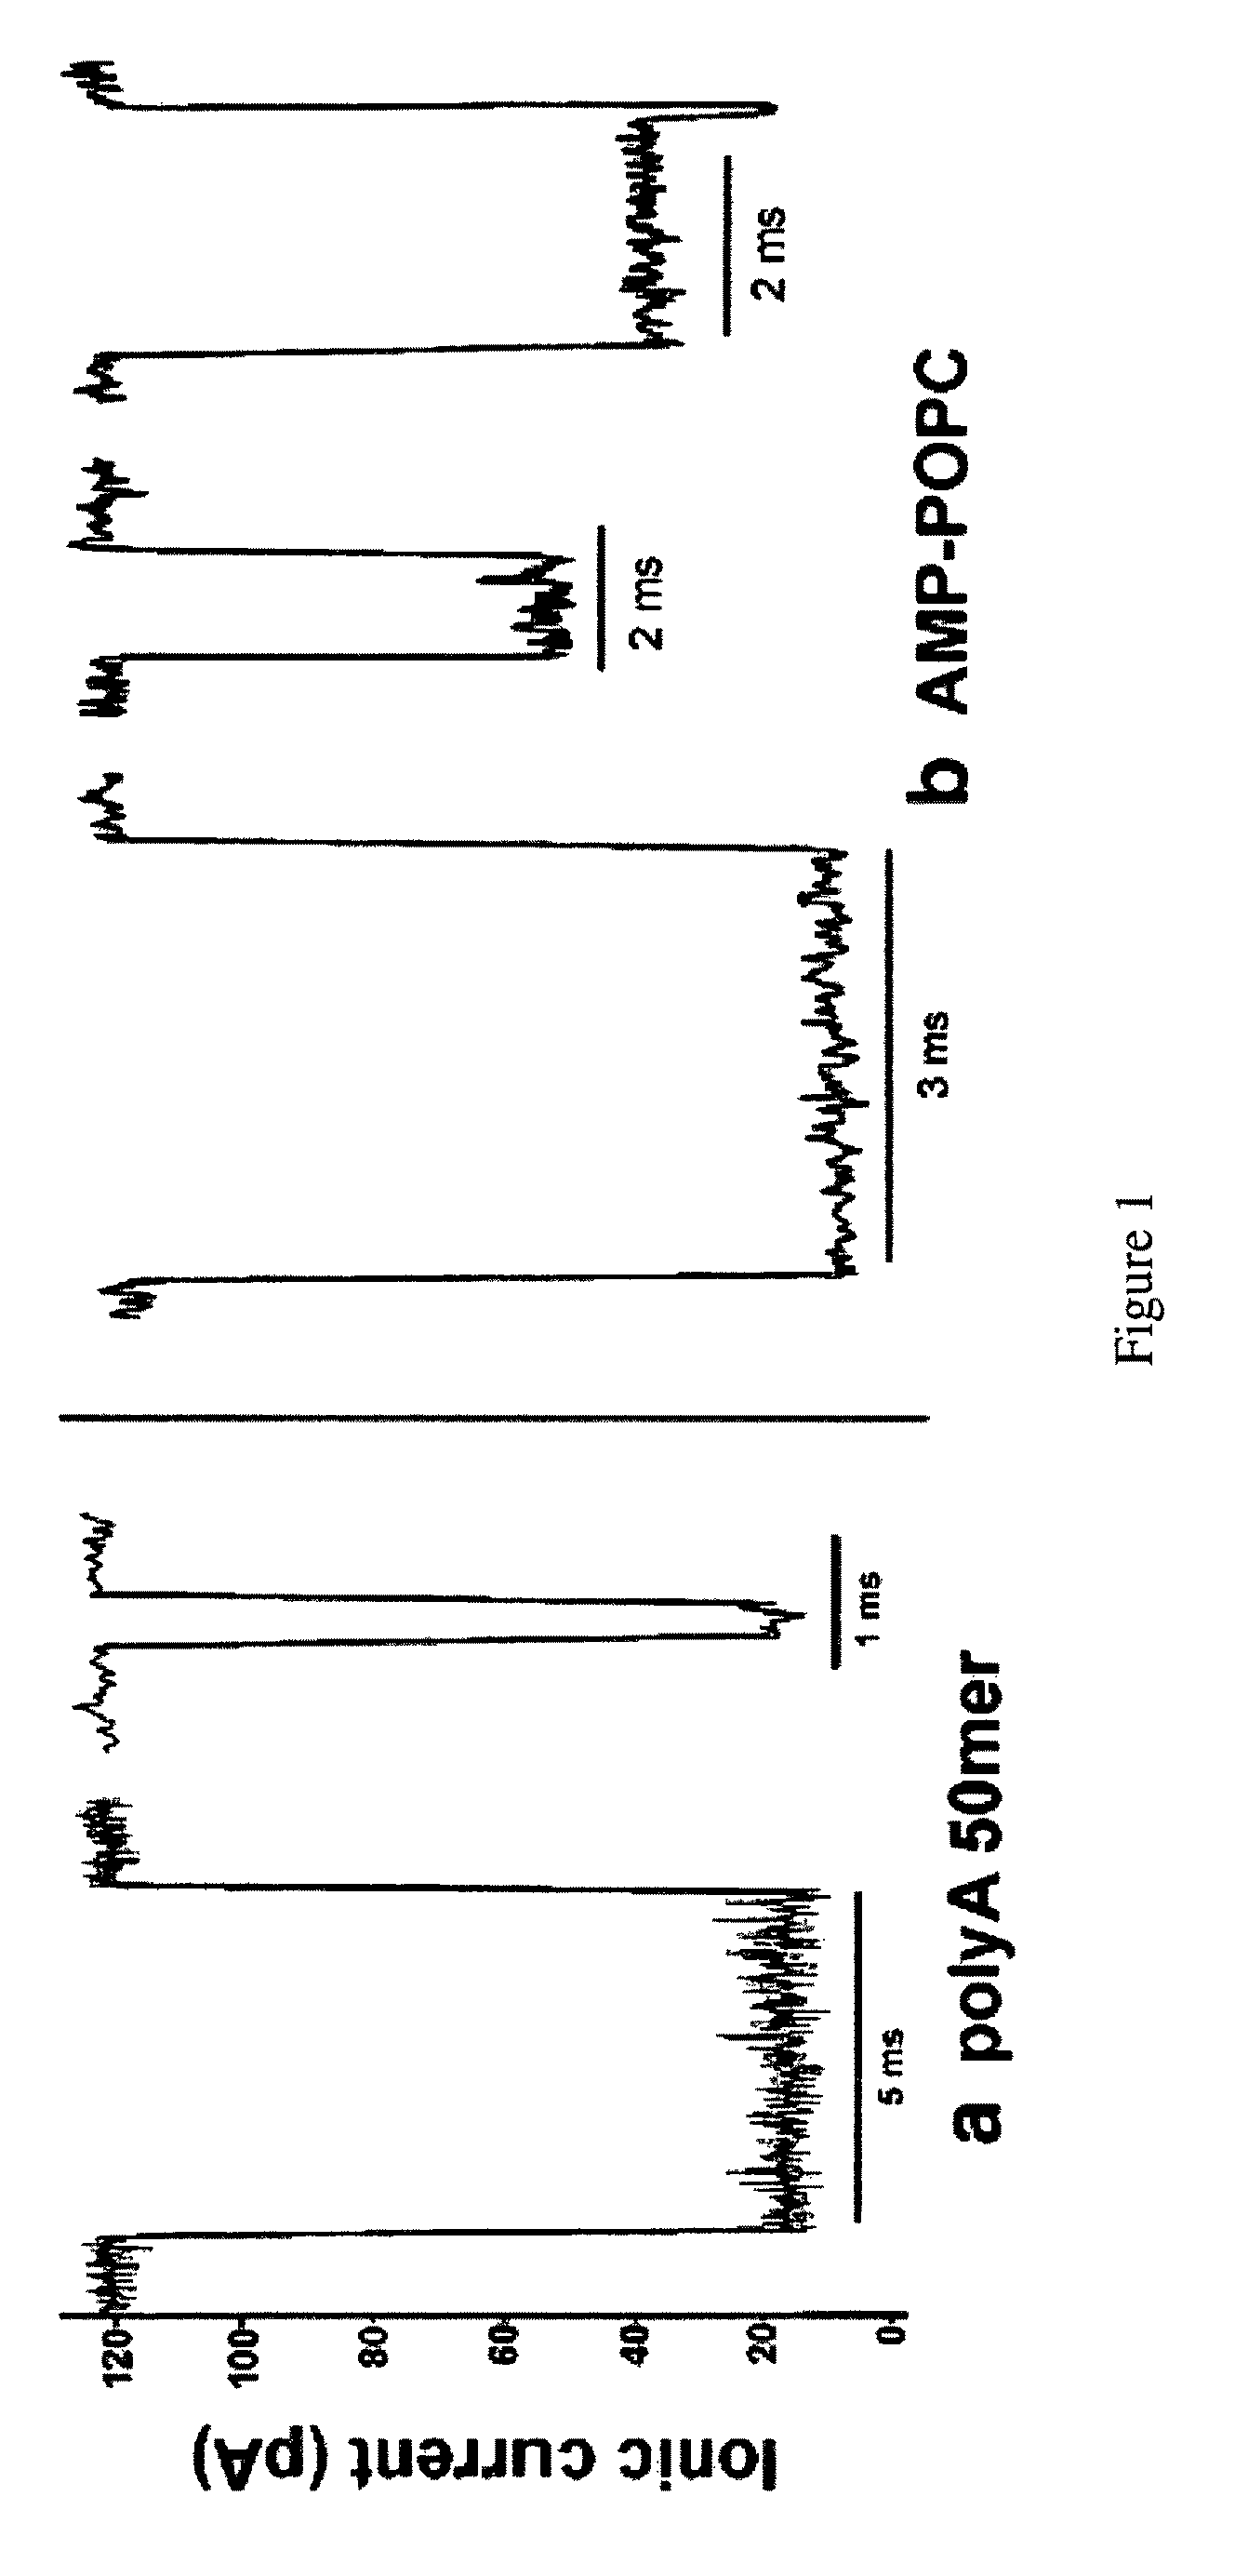 Lipid-assisted synthesis of polymer compounds and methods for their use